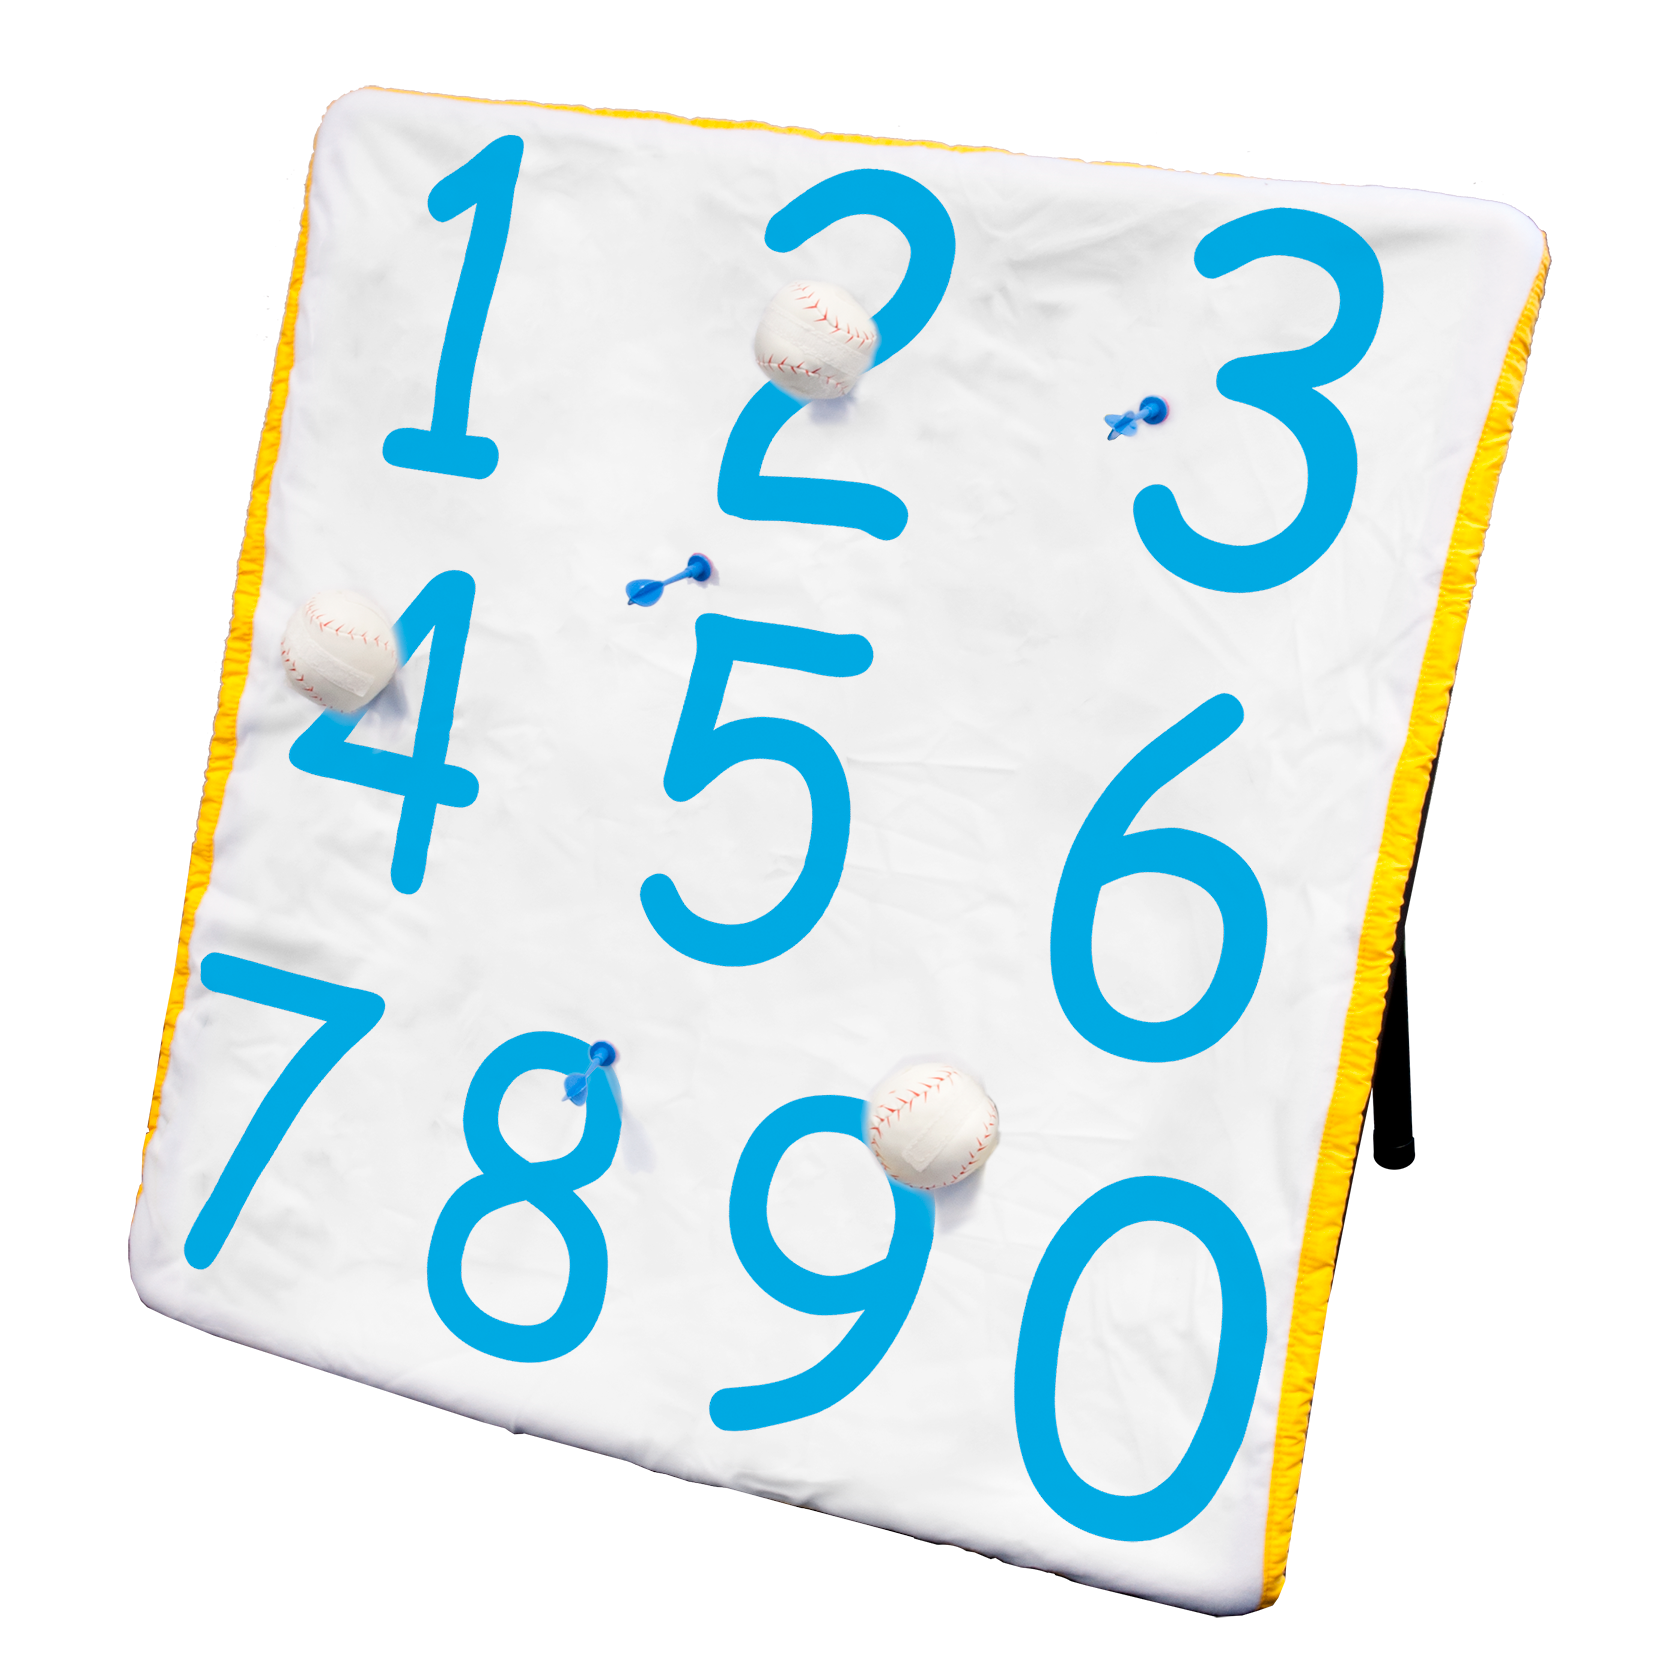 Park and Sports Toss and learn velcro ball, dart target, numbers